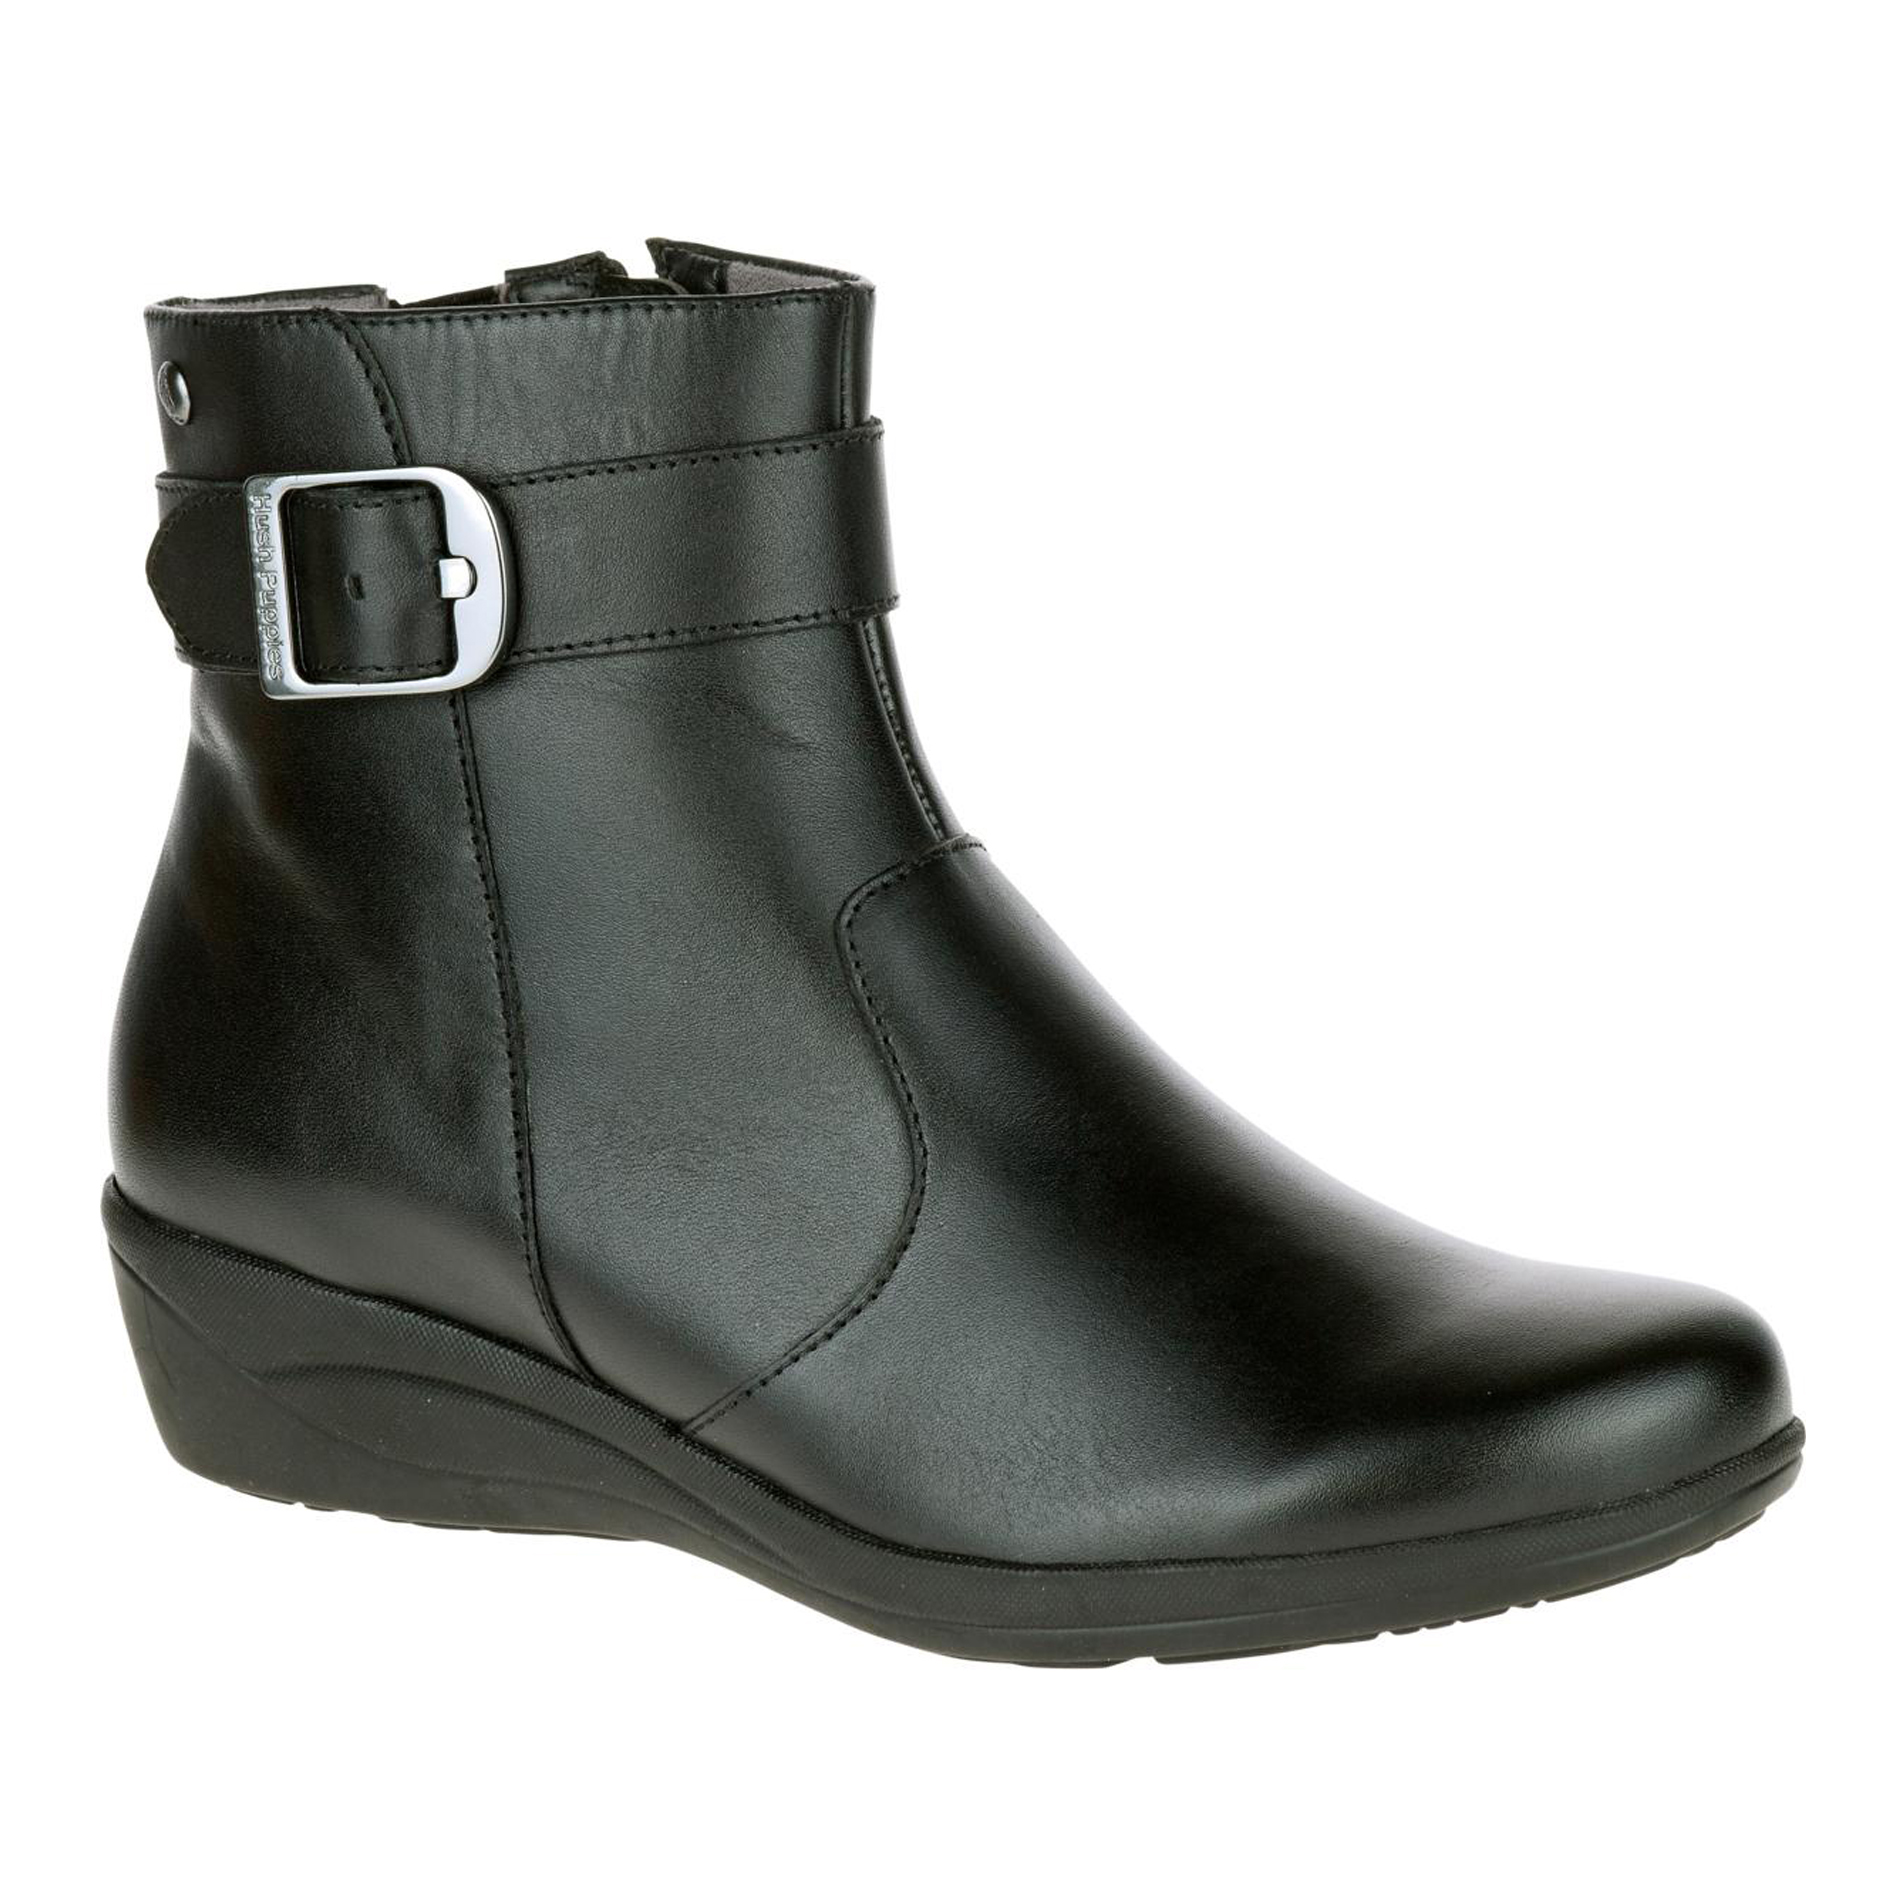 Hush Puppies Women's Ethel Oleena Leather Boot - Black Wide Width Avail